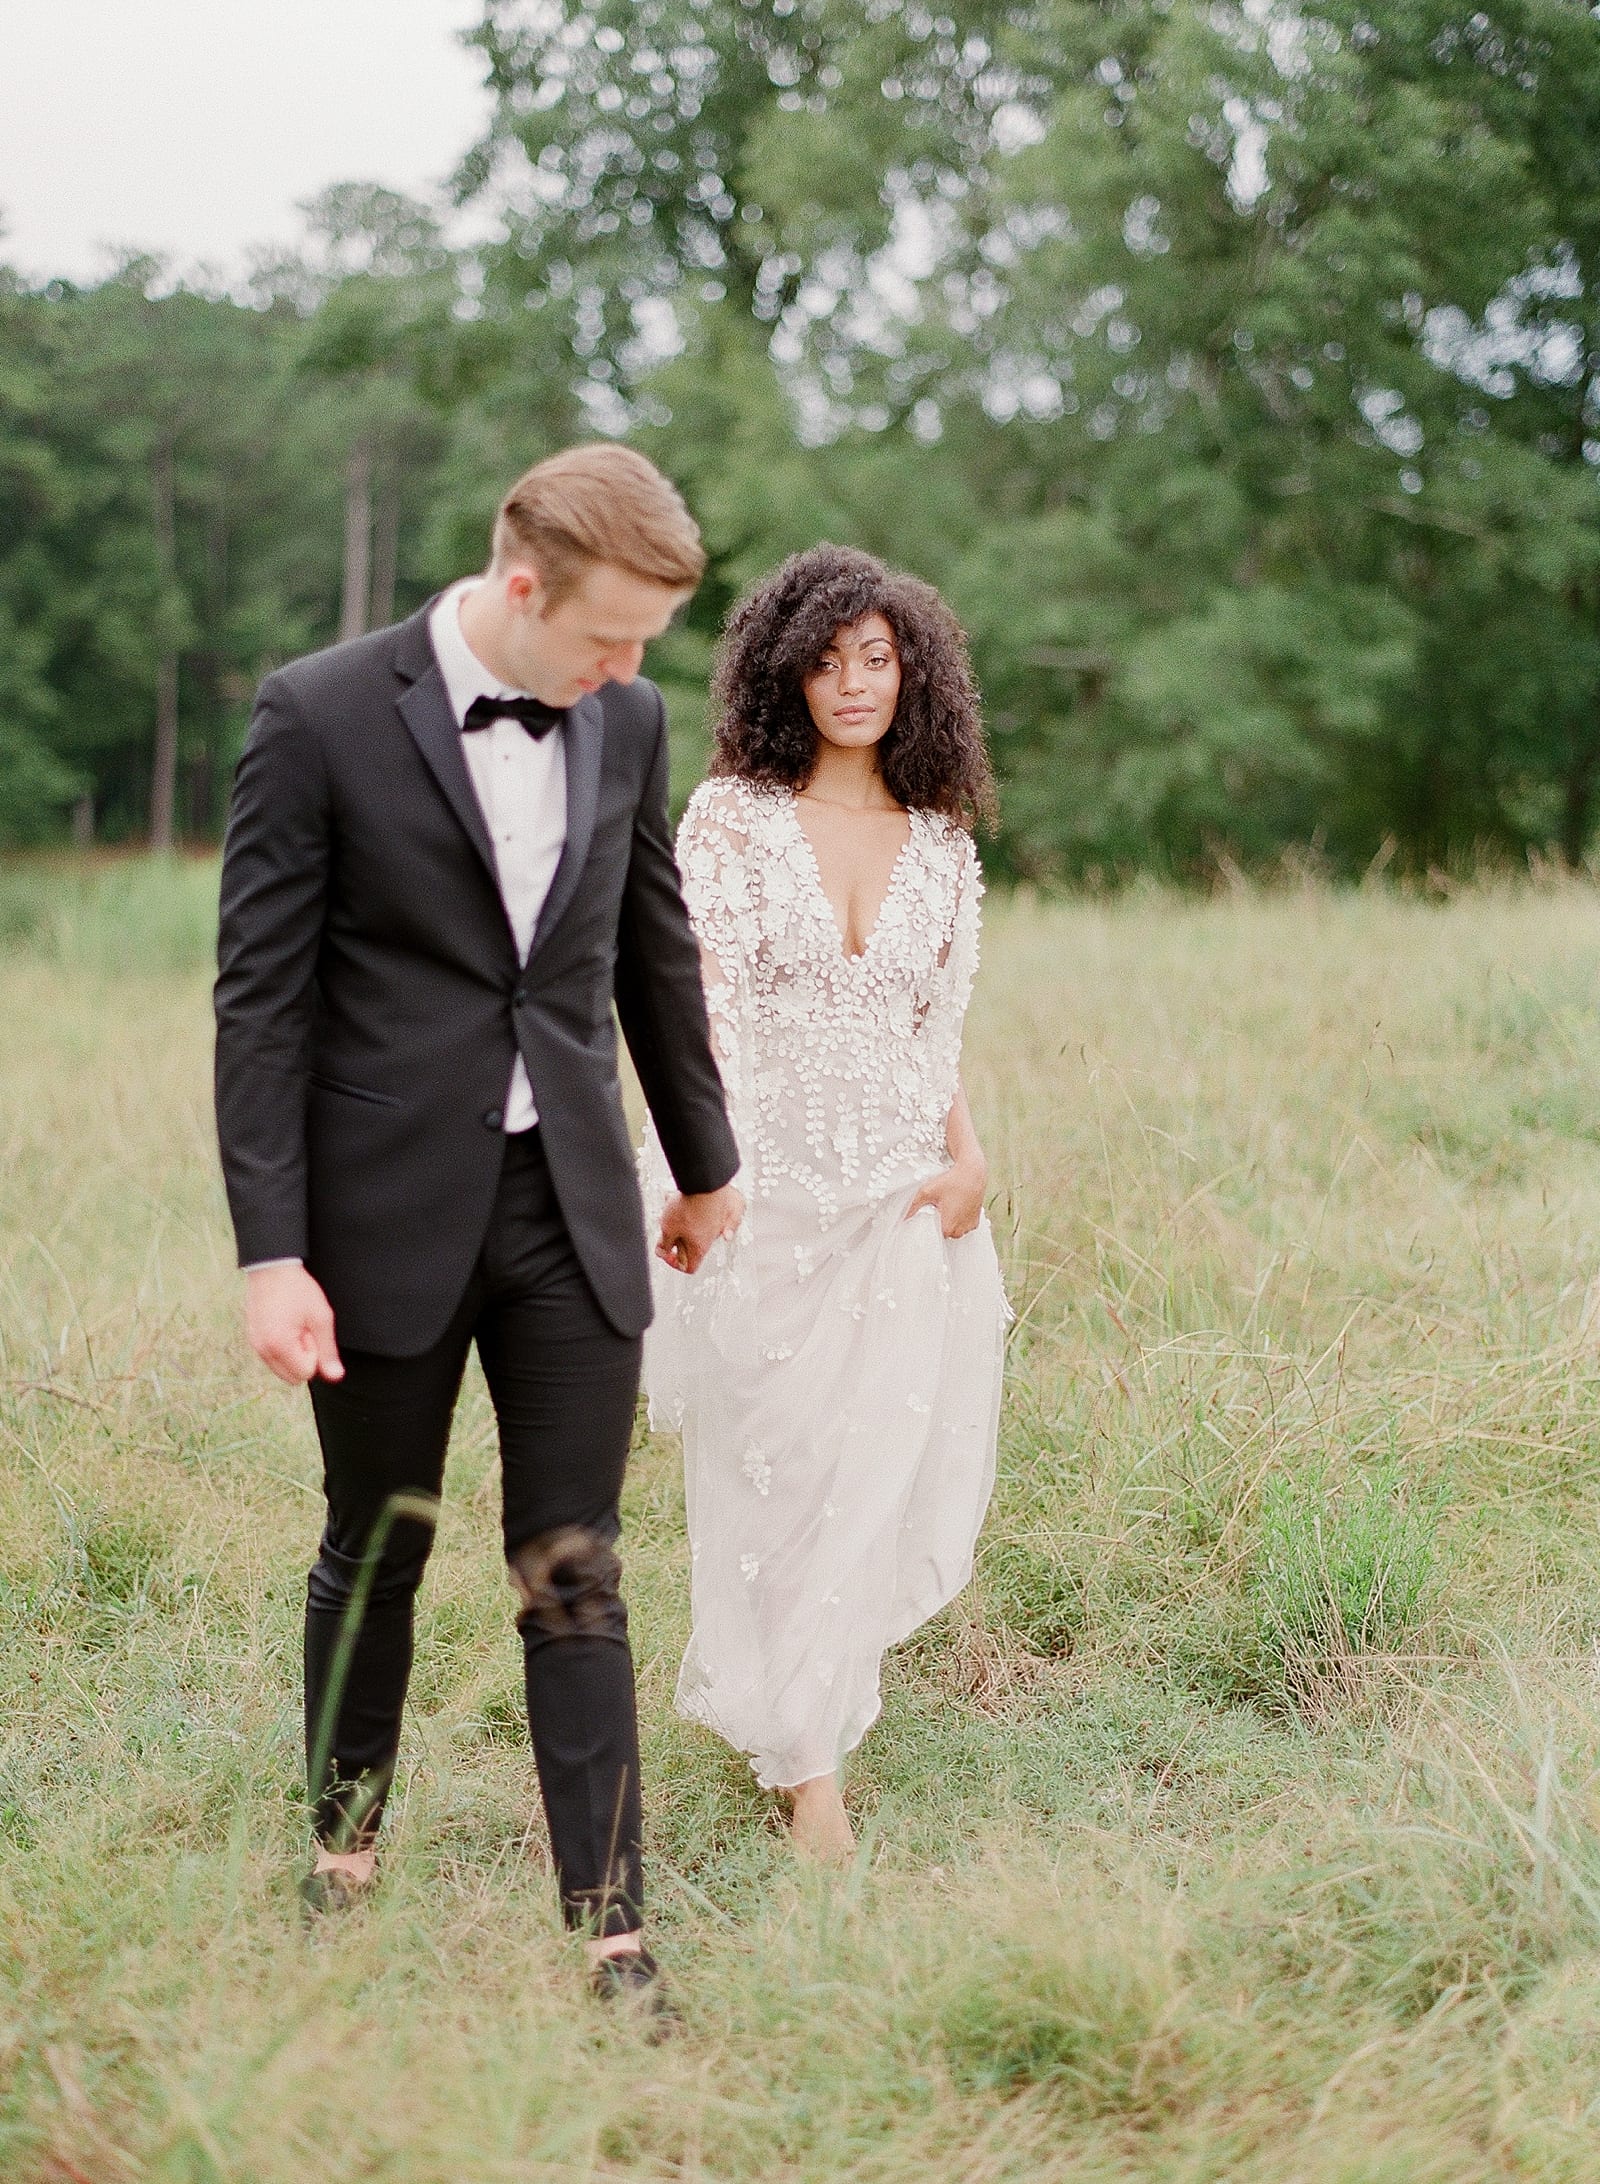 Bride and Groom Walking Through Field Holding Hands Photo